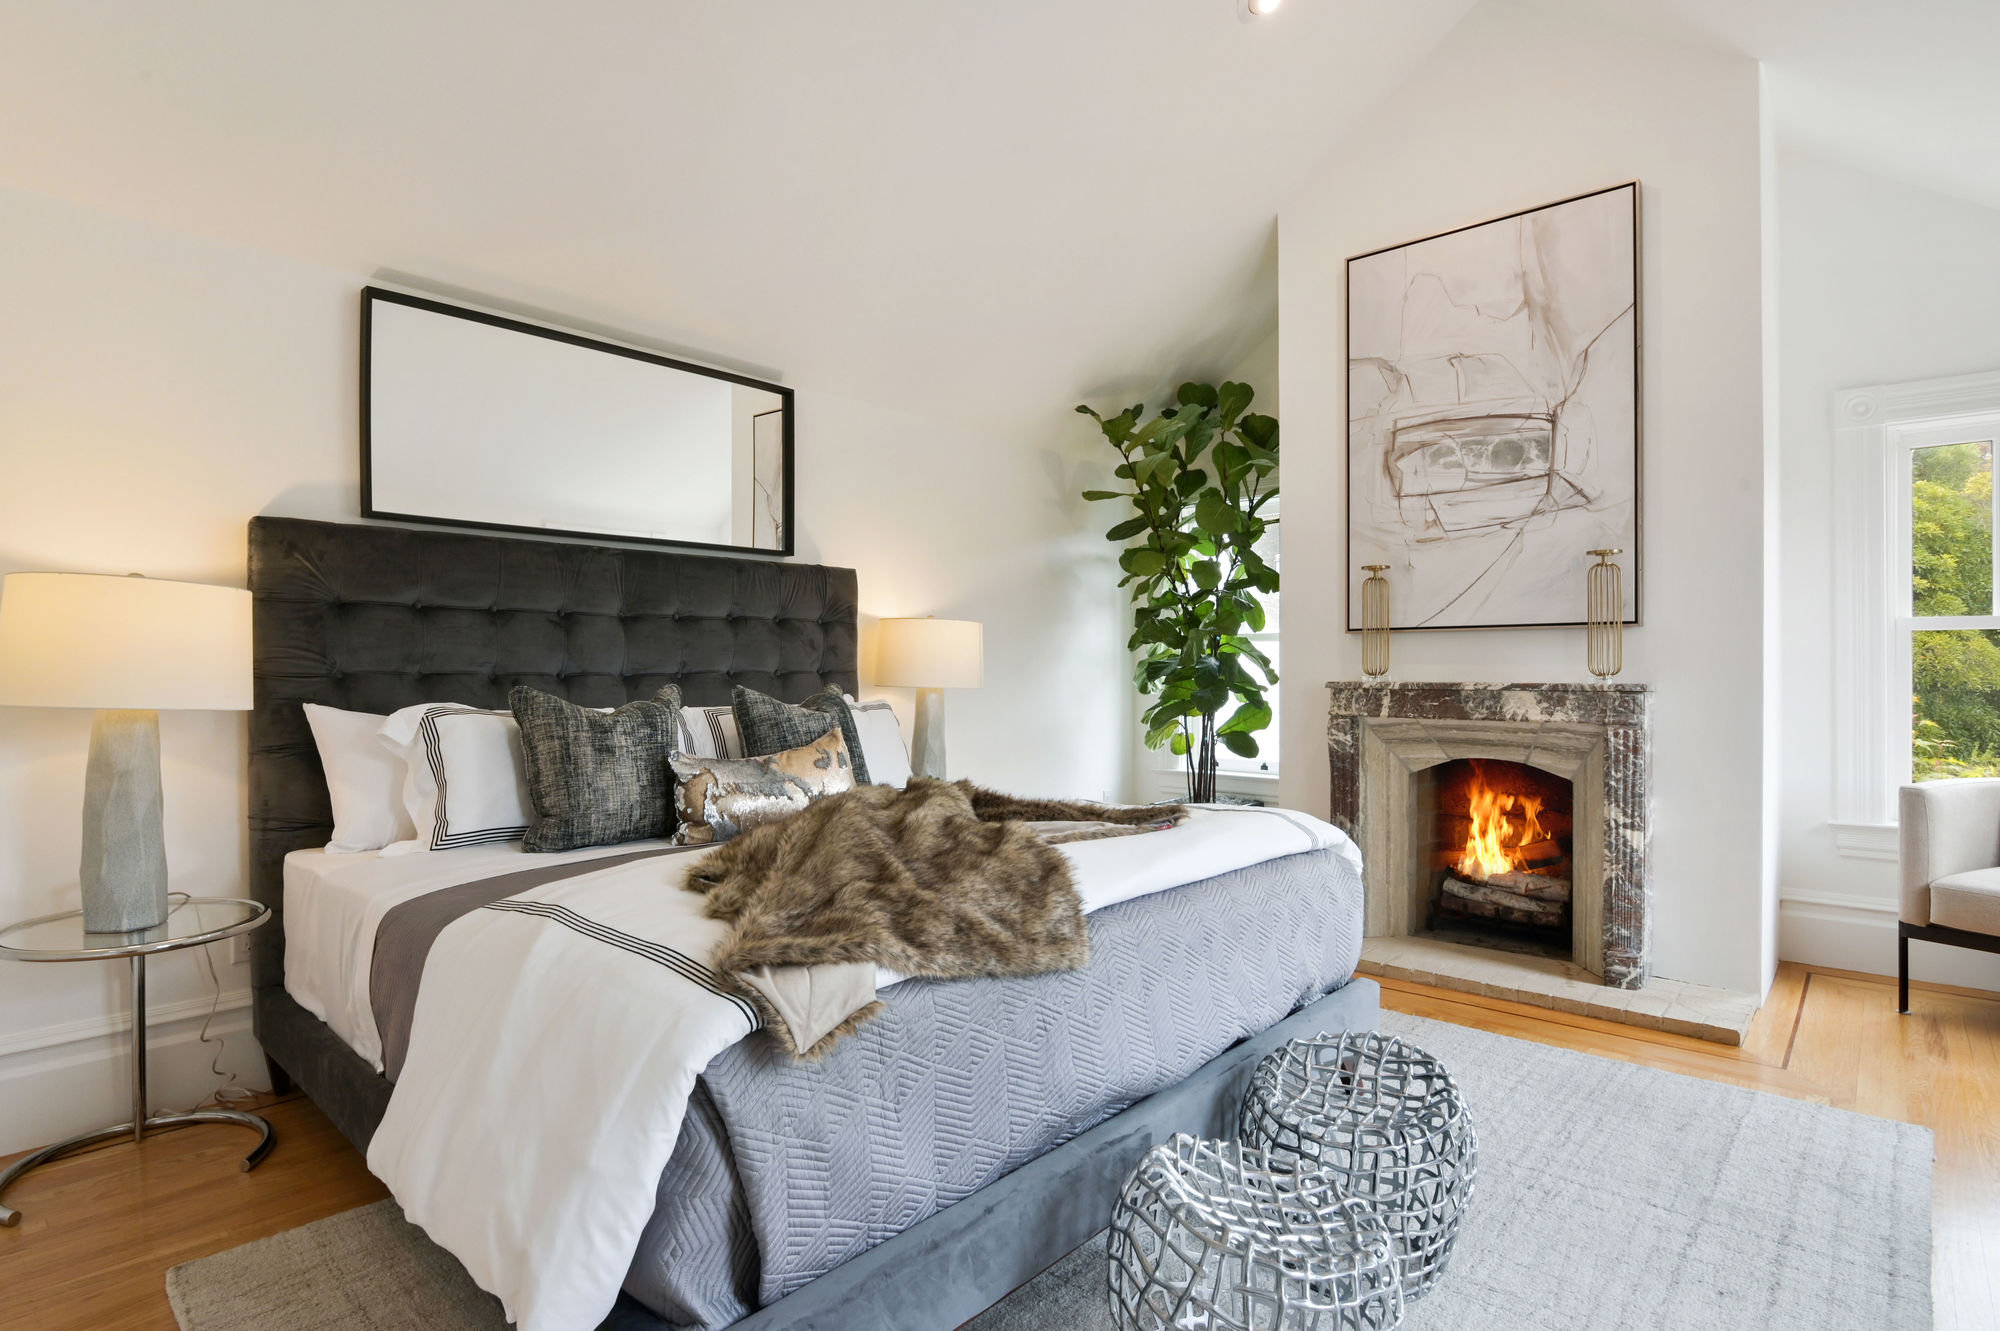 Property Photo: Primary bedroom with a fireplace and wood floors